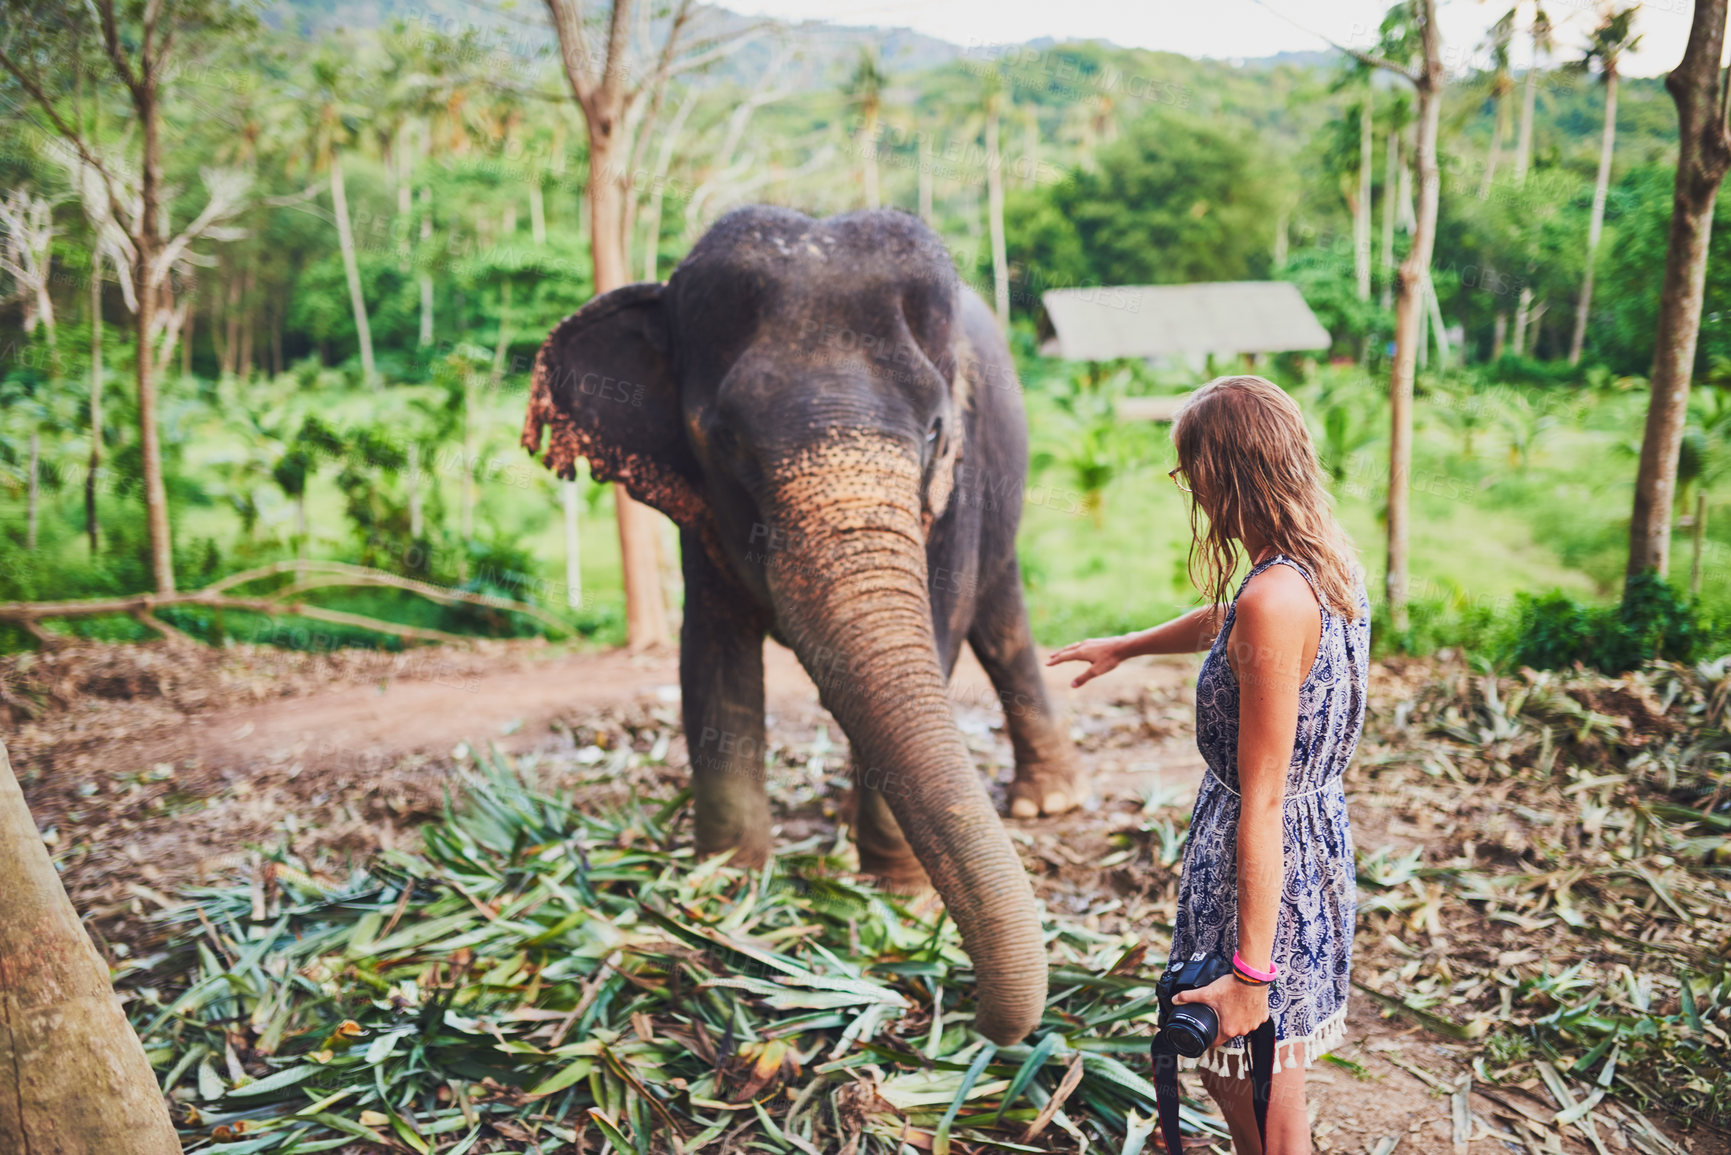 Buy stock photo Shot of a young tourist admiring an elephant in the jungle